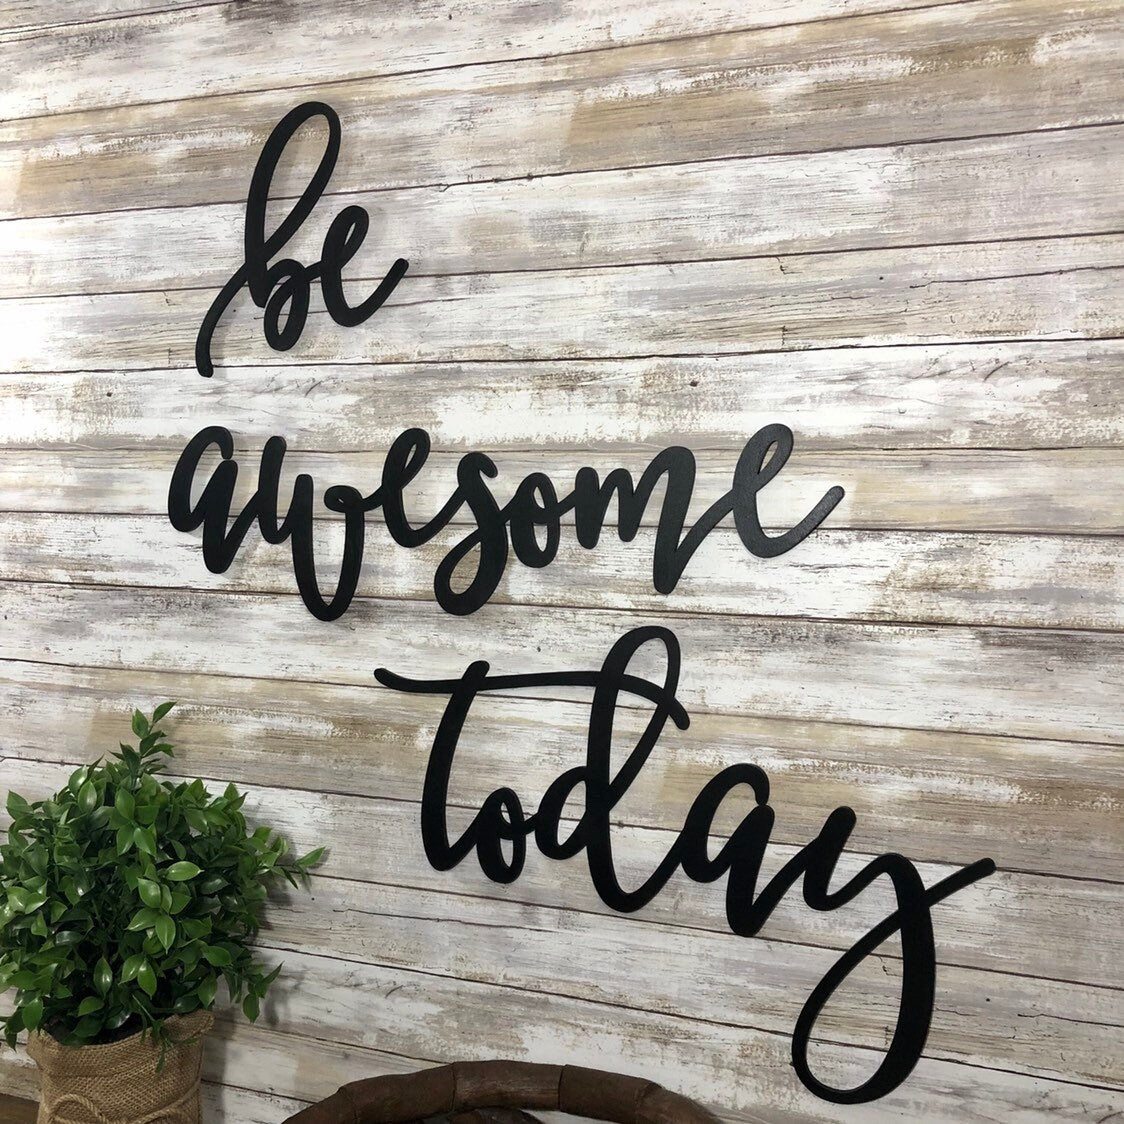 Be Awesome Today Wood Words, Inspirational Quotes, Positive Quotes Home Decor, Gift For Best Friend, Motivational Office Wall Decor